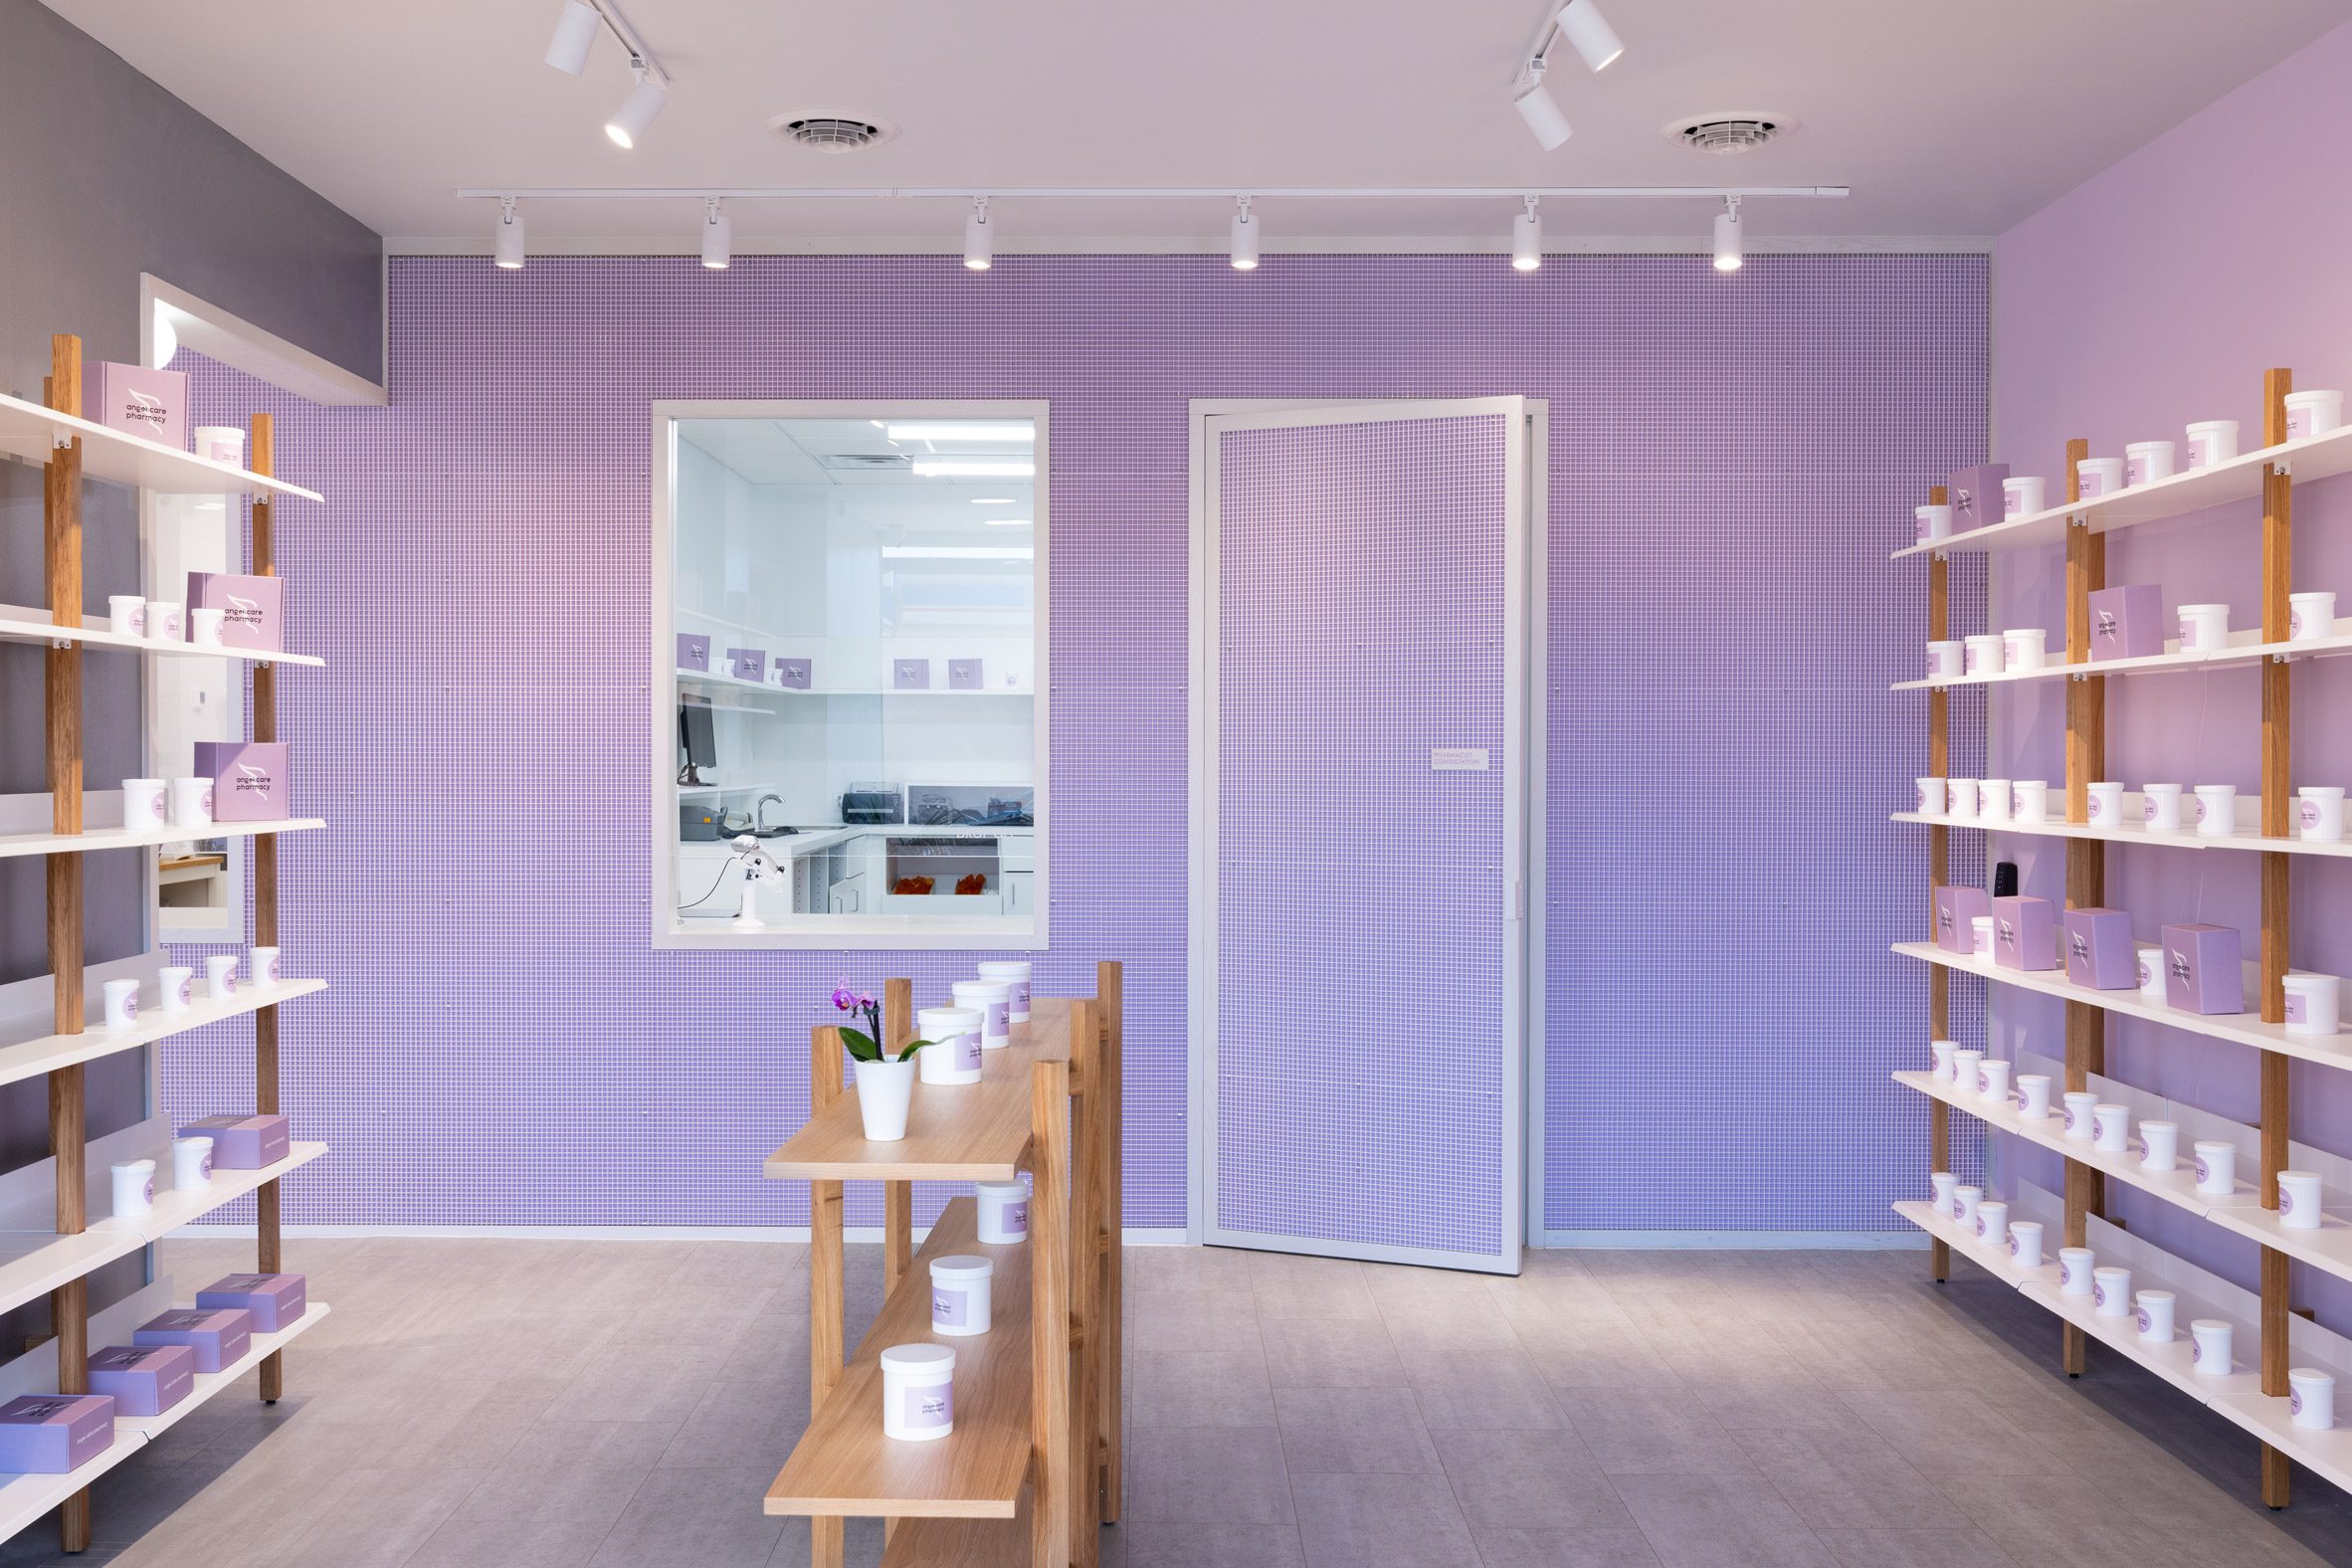 Oak-framed shelving displays products in a mauve room